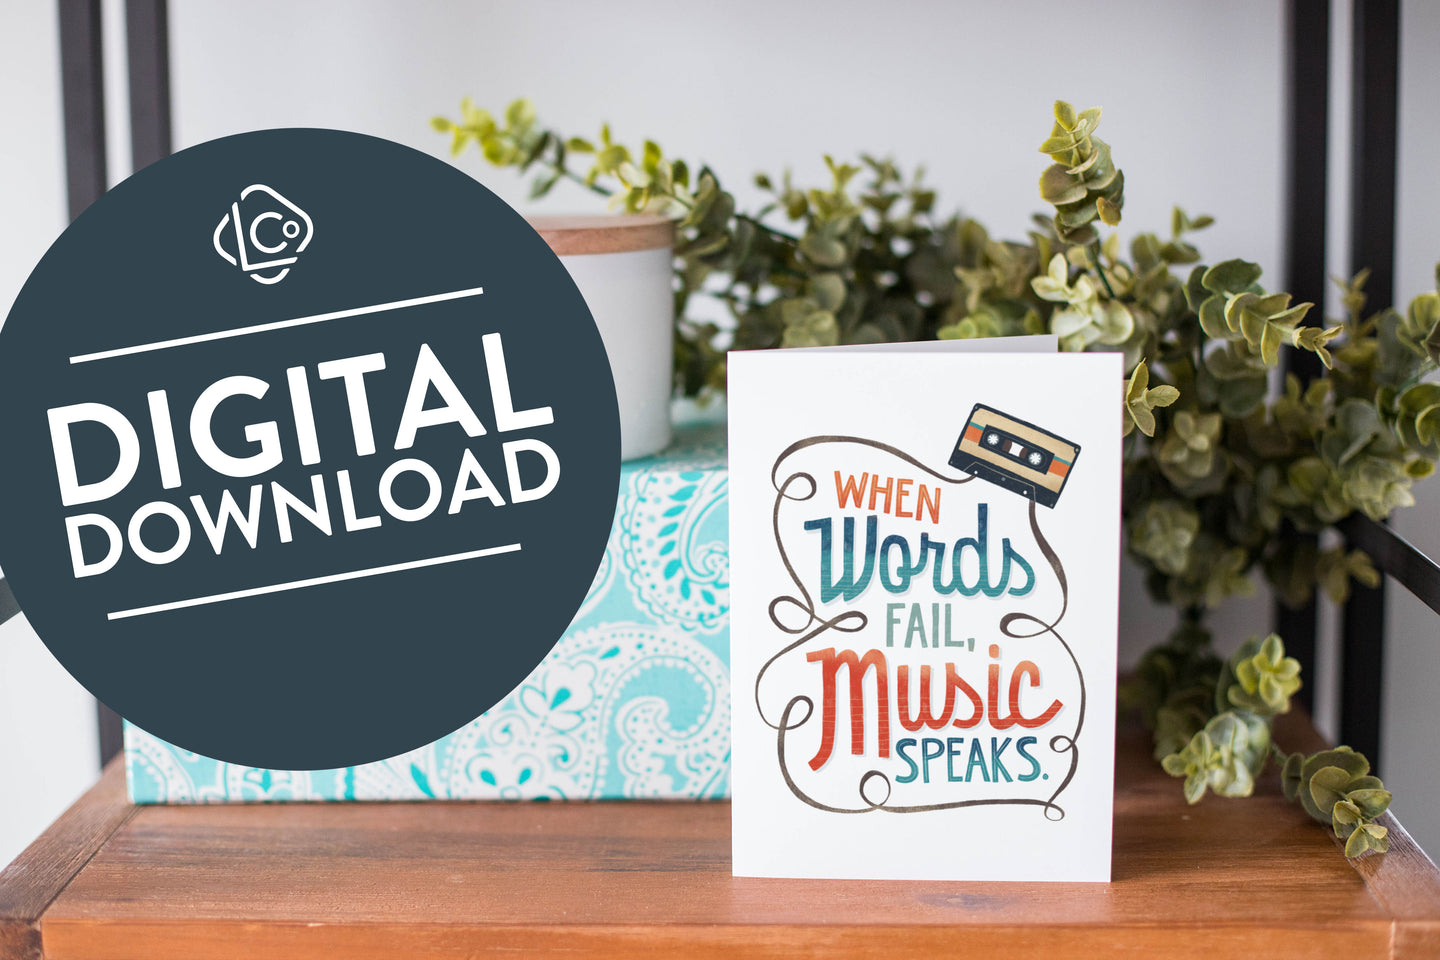 A greeting card is on a table top with a present in blue wrapping paper in the background. On top of the present is a candle and some greenery from a plant too. The card features the words “When words fail, music speaks.” The words 